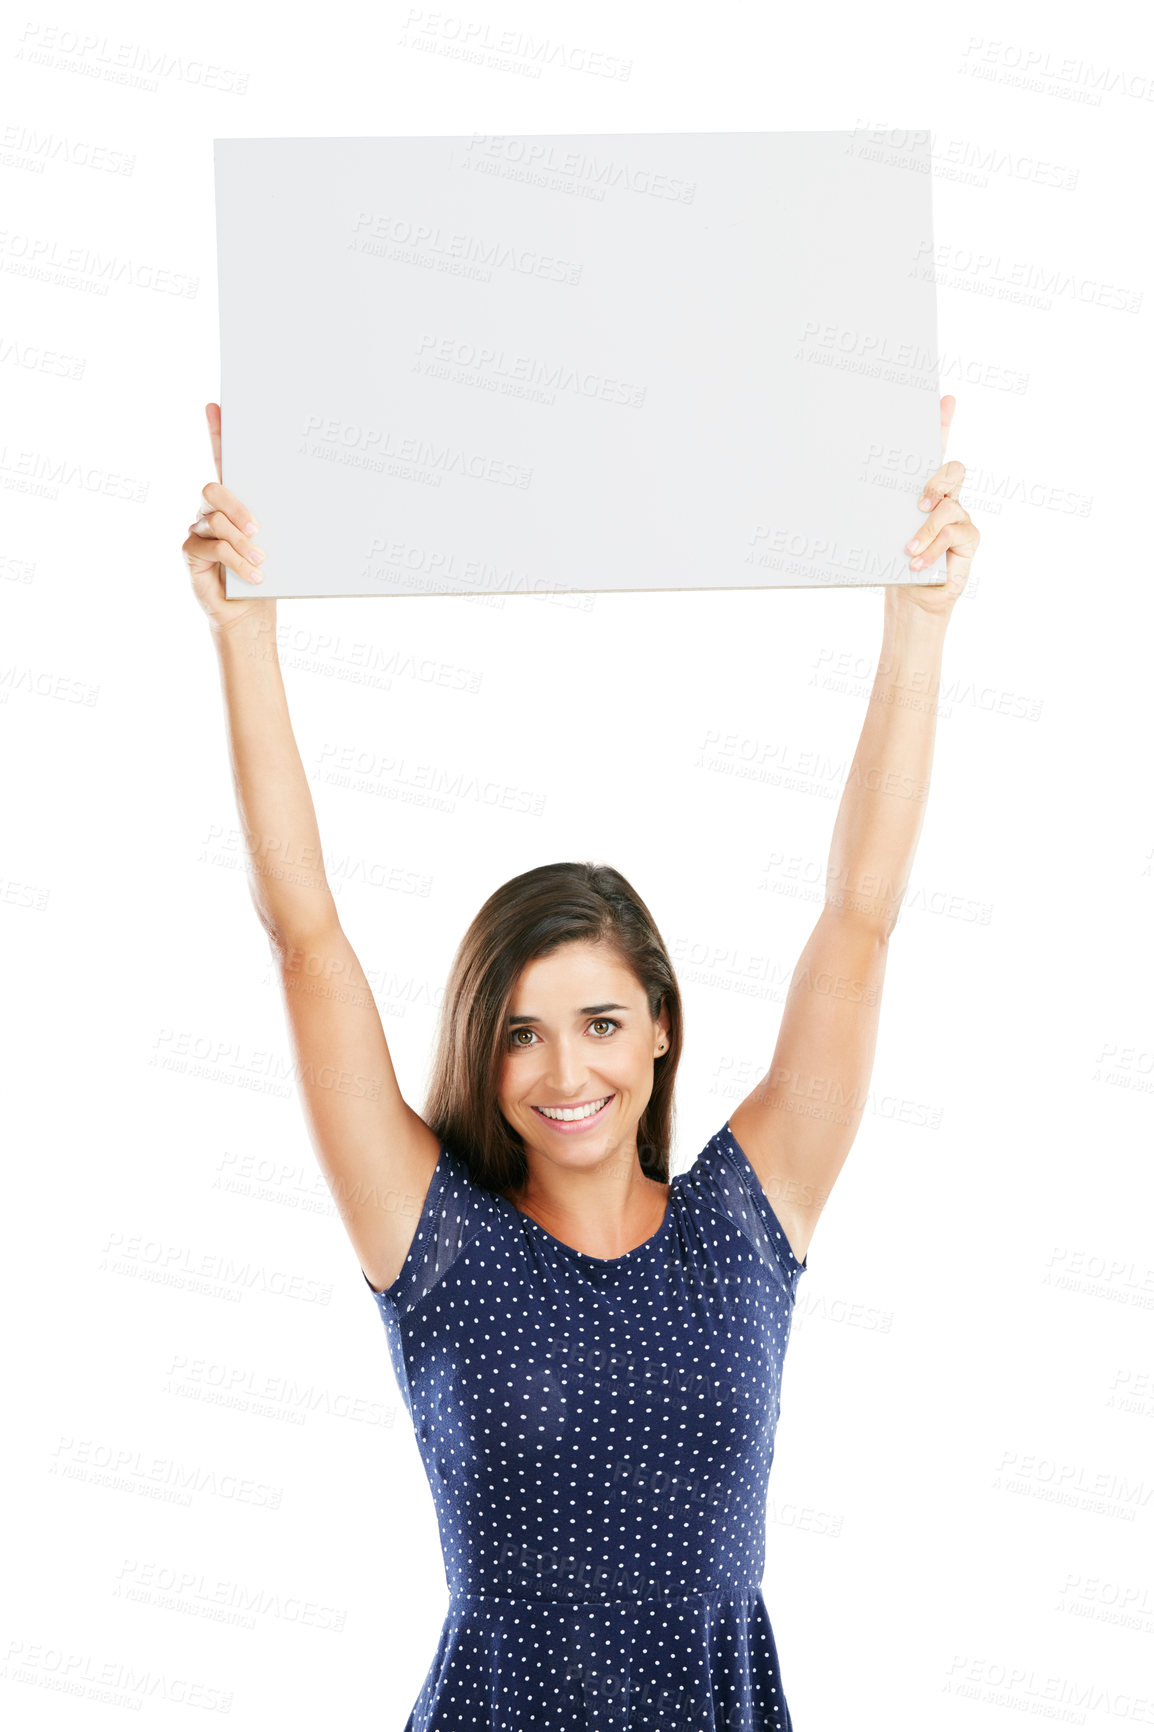 Buy stock photo Studio portrait of an attractive young woman holding up a blank placard against a white background